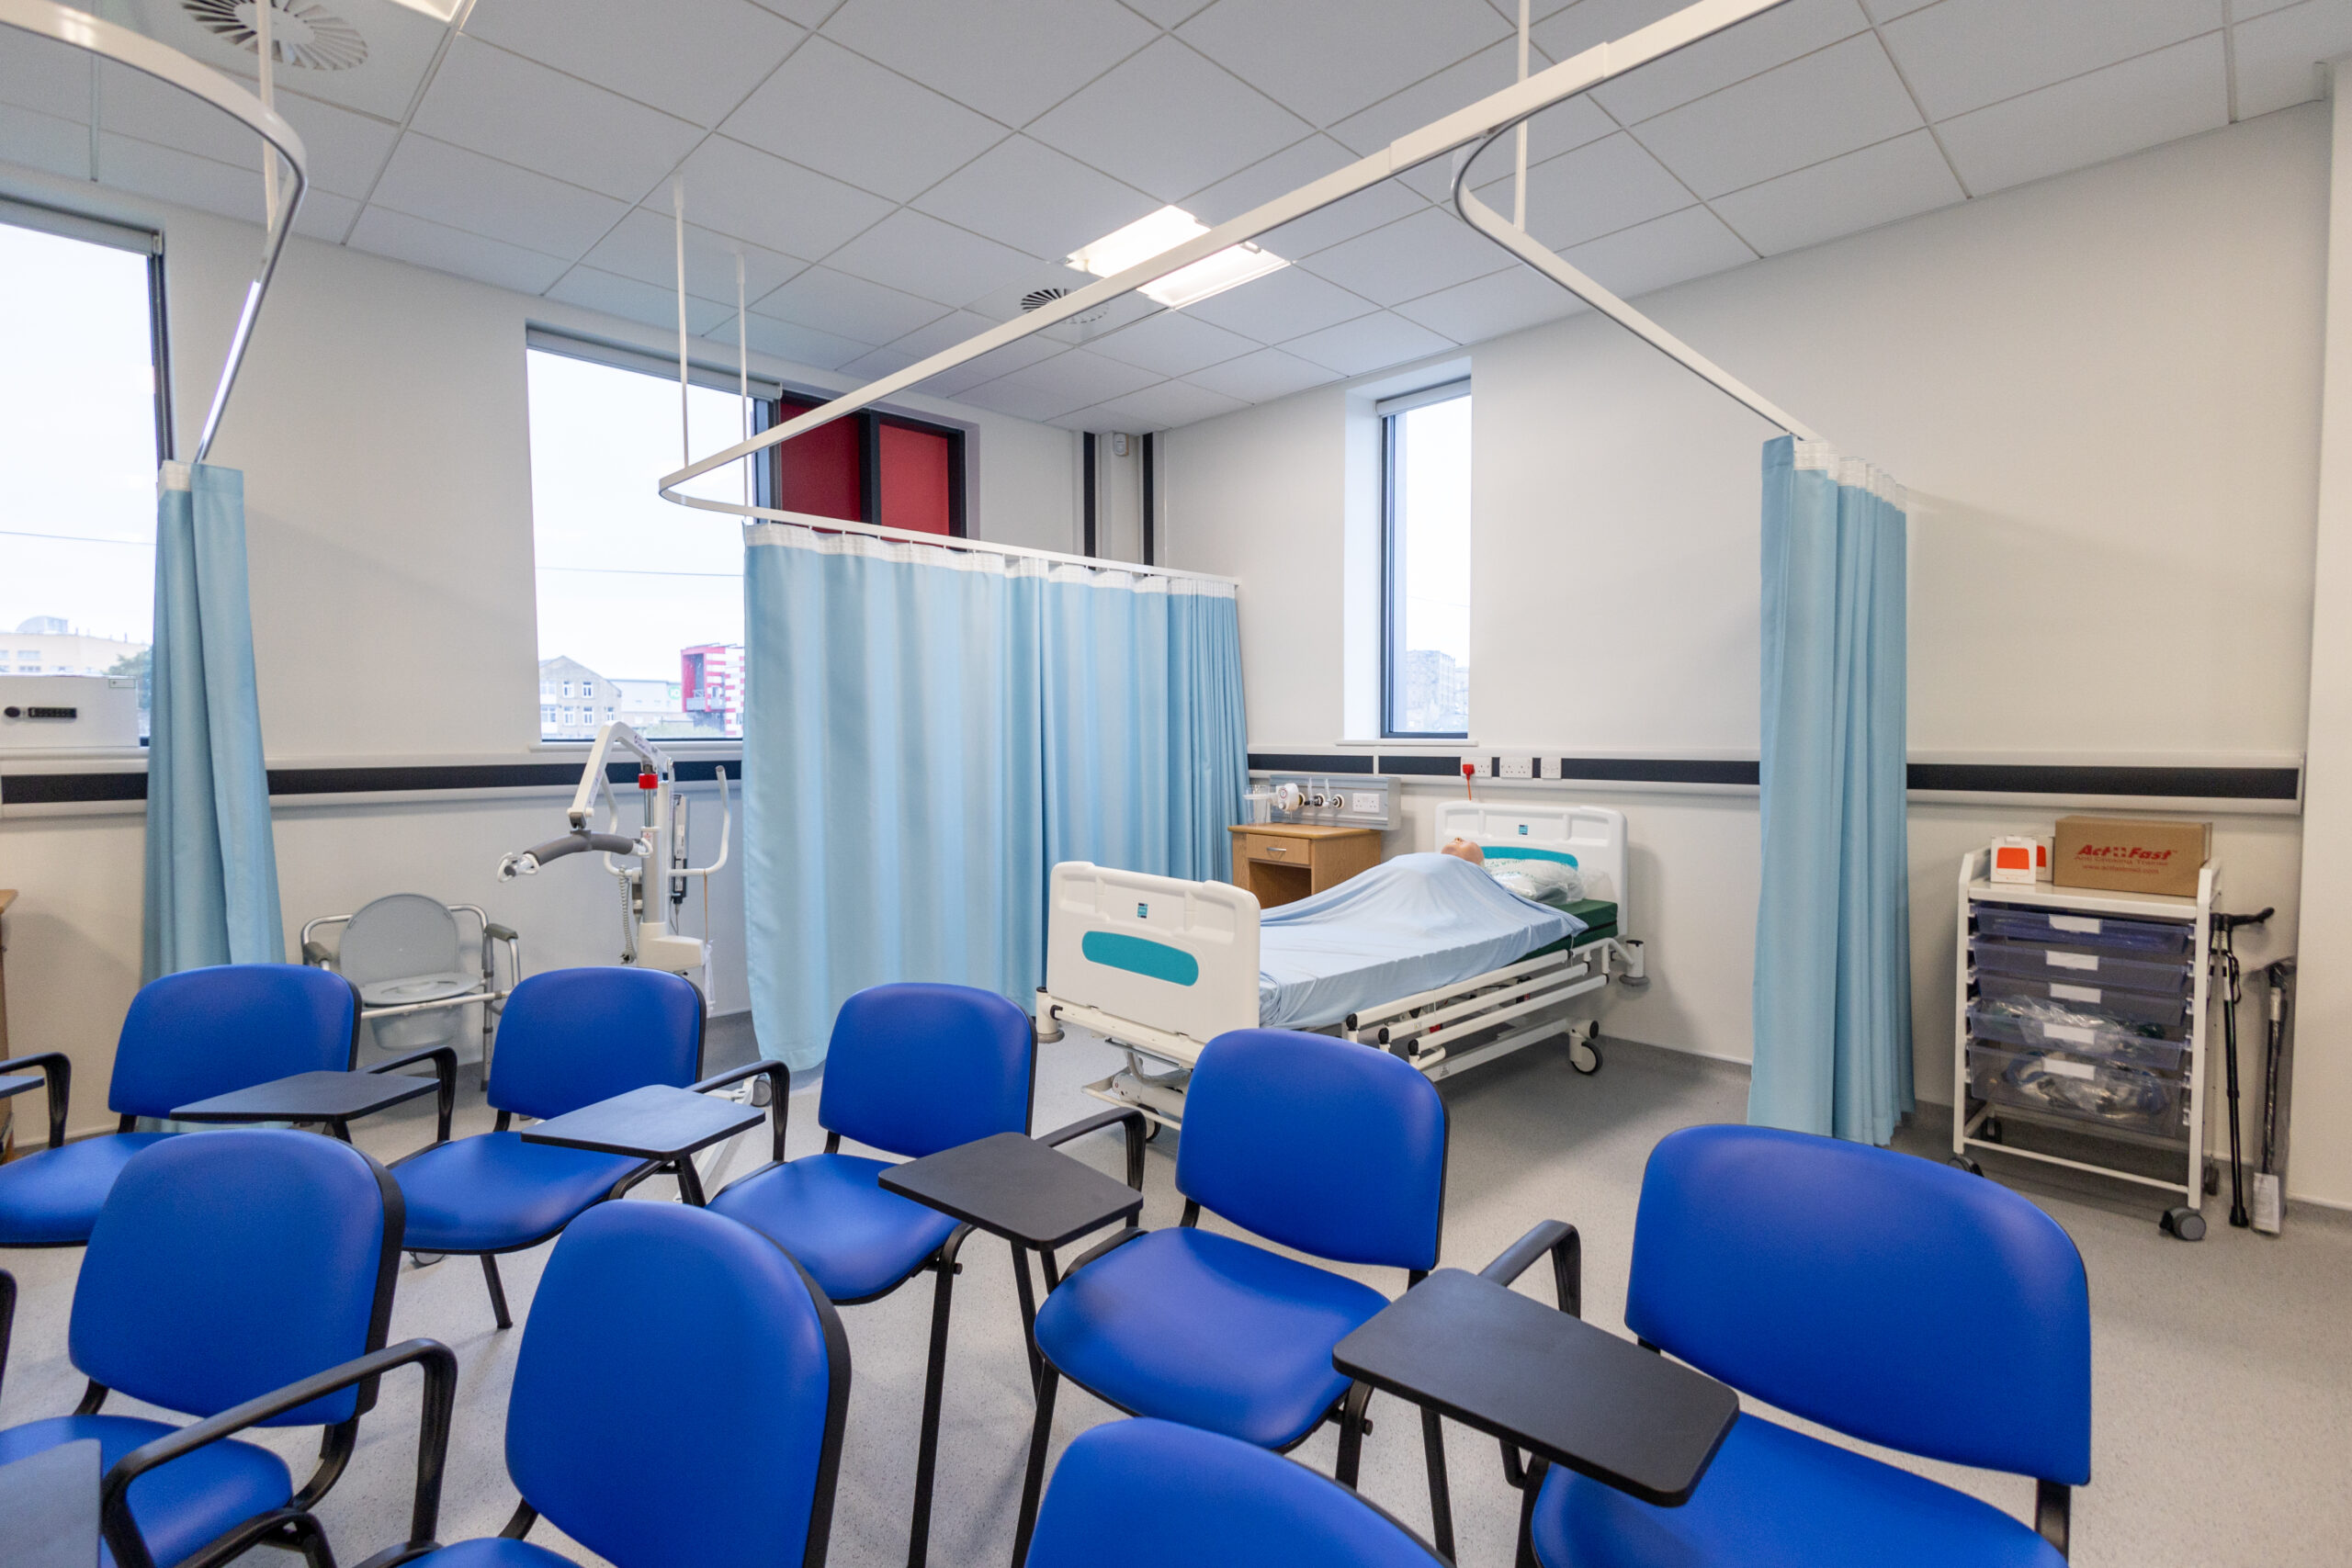 a nursing suite with curtains, hospital beds and surgical equipment